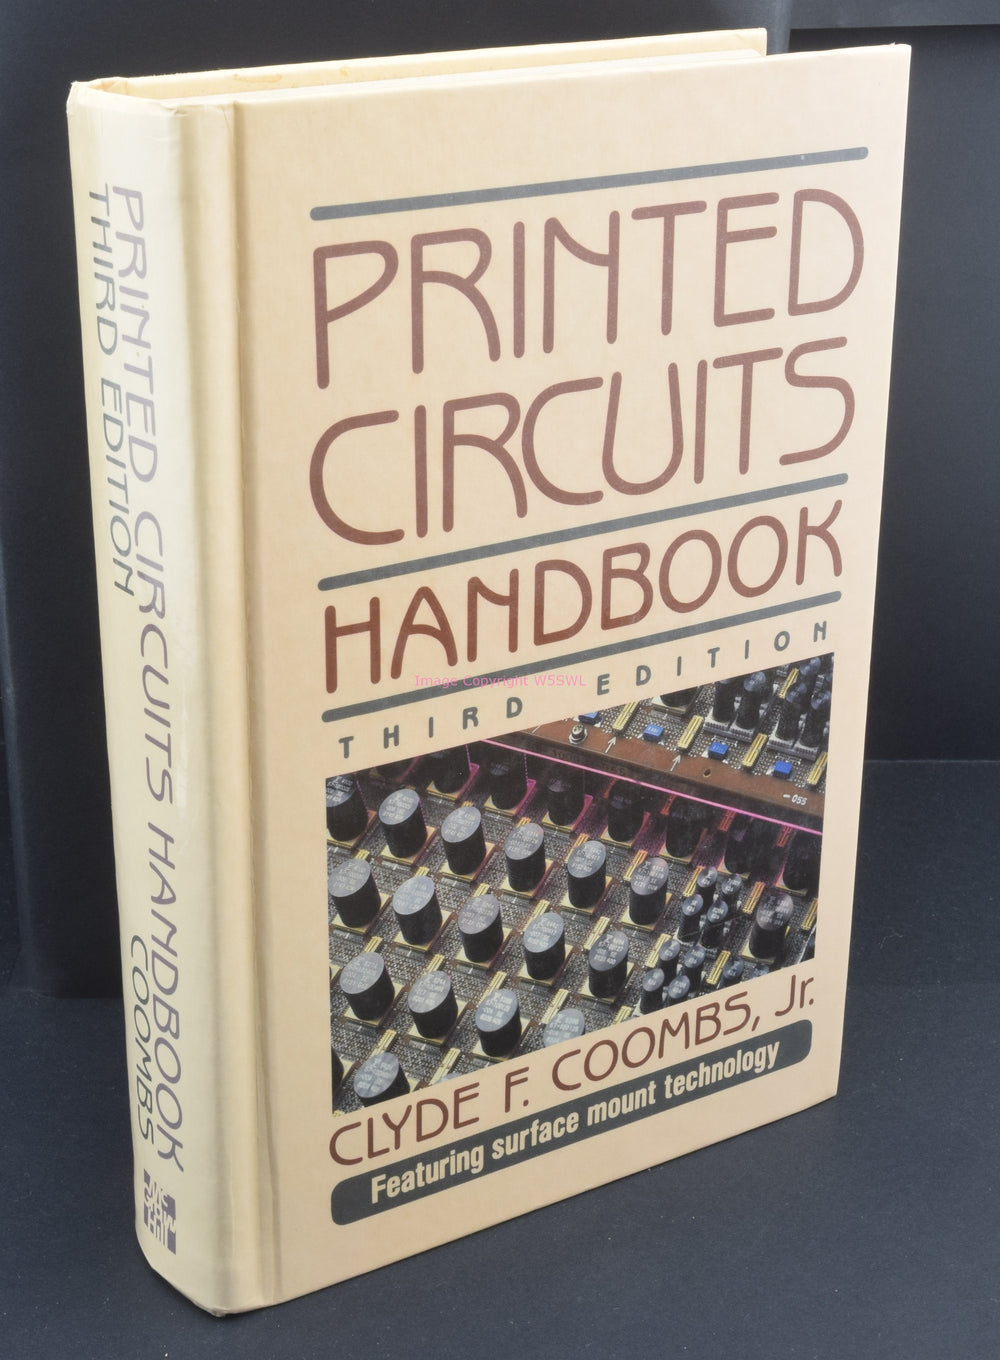 Printed Circuits Handbook 3rd Ed Clyde Coombs - Dave's Hobby Shop by W5SWL